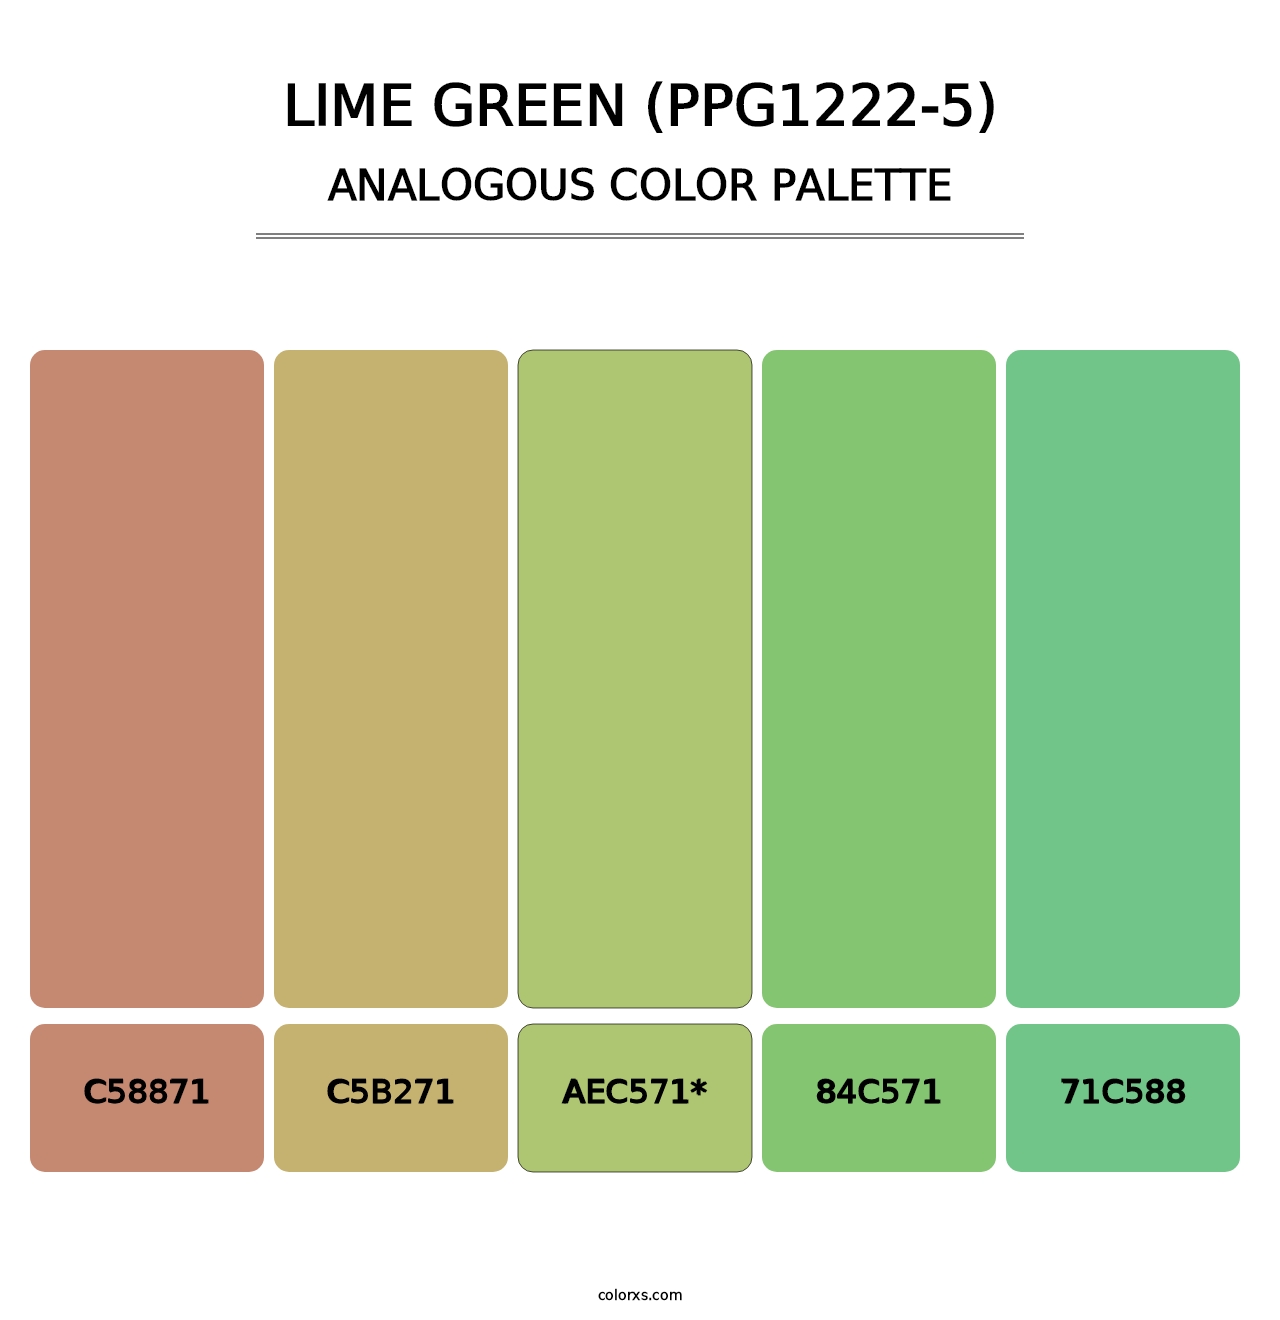 Lime Green (PPG1222-5) - Analogous Color Palette